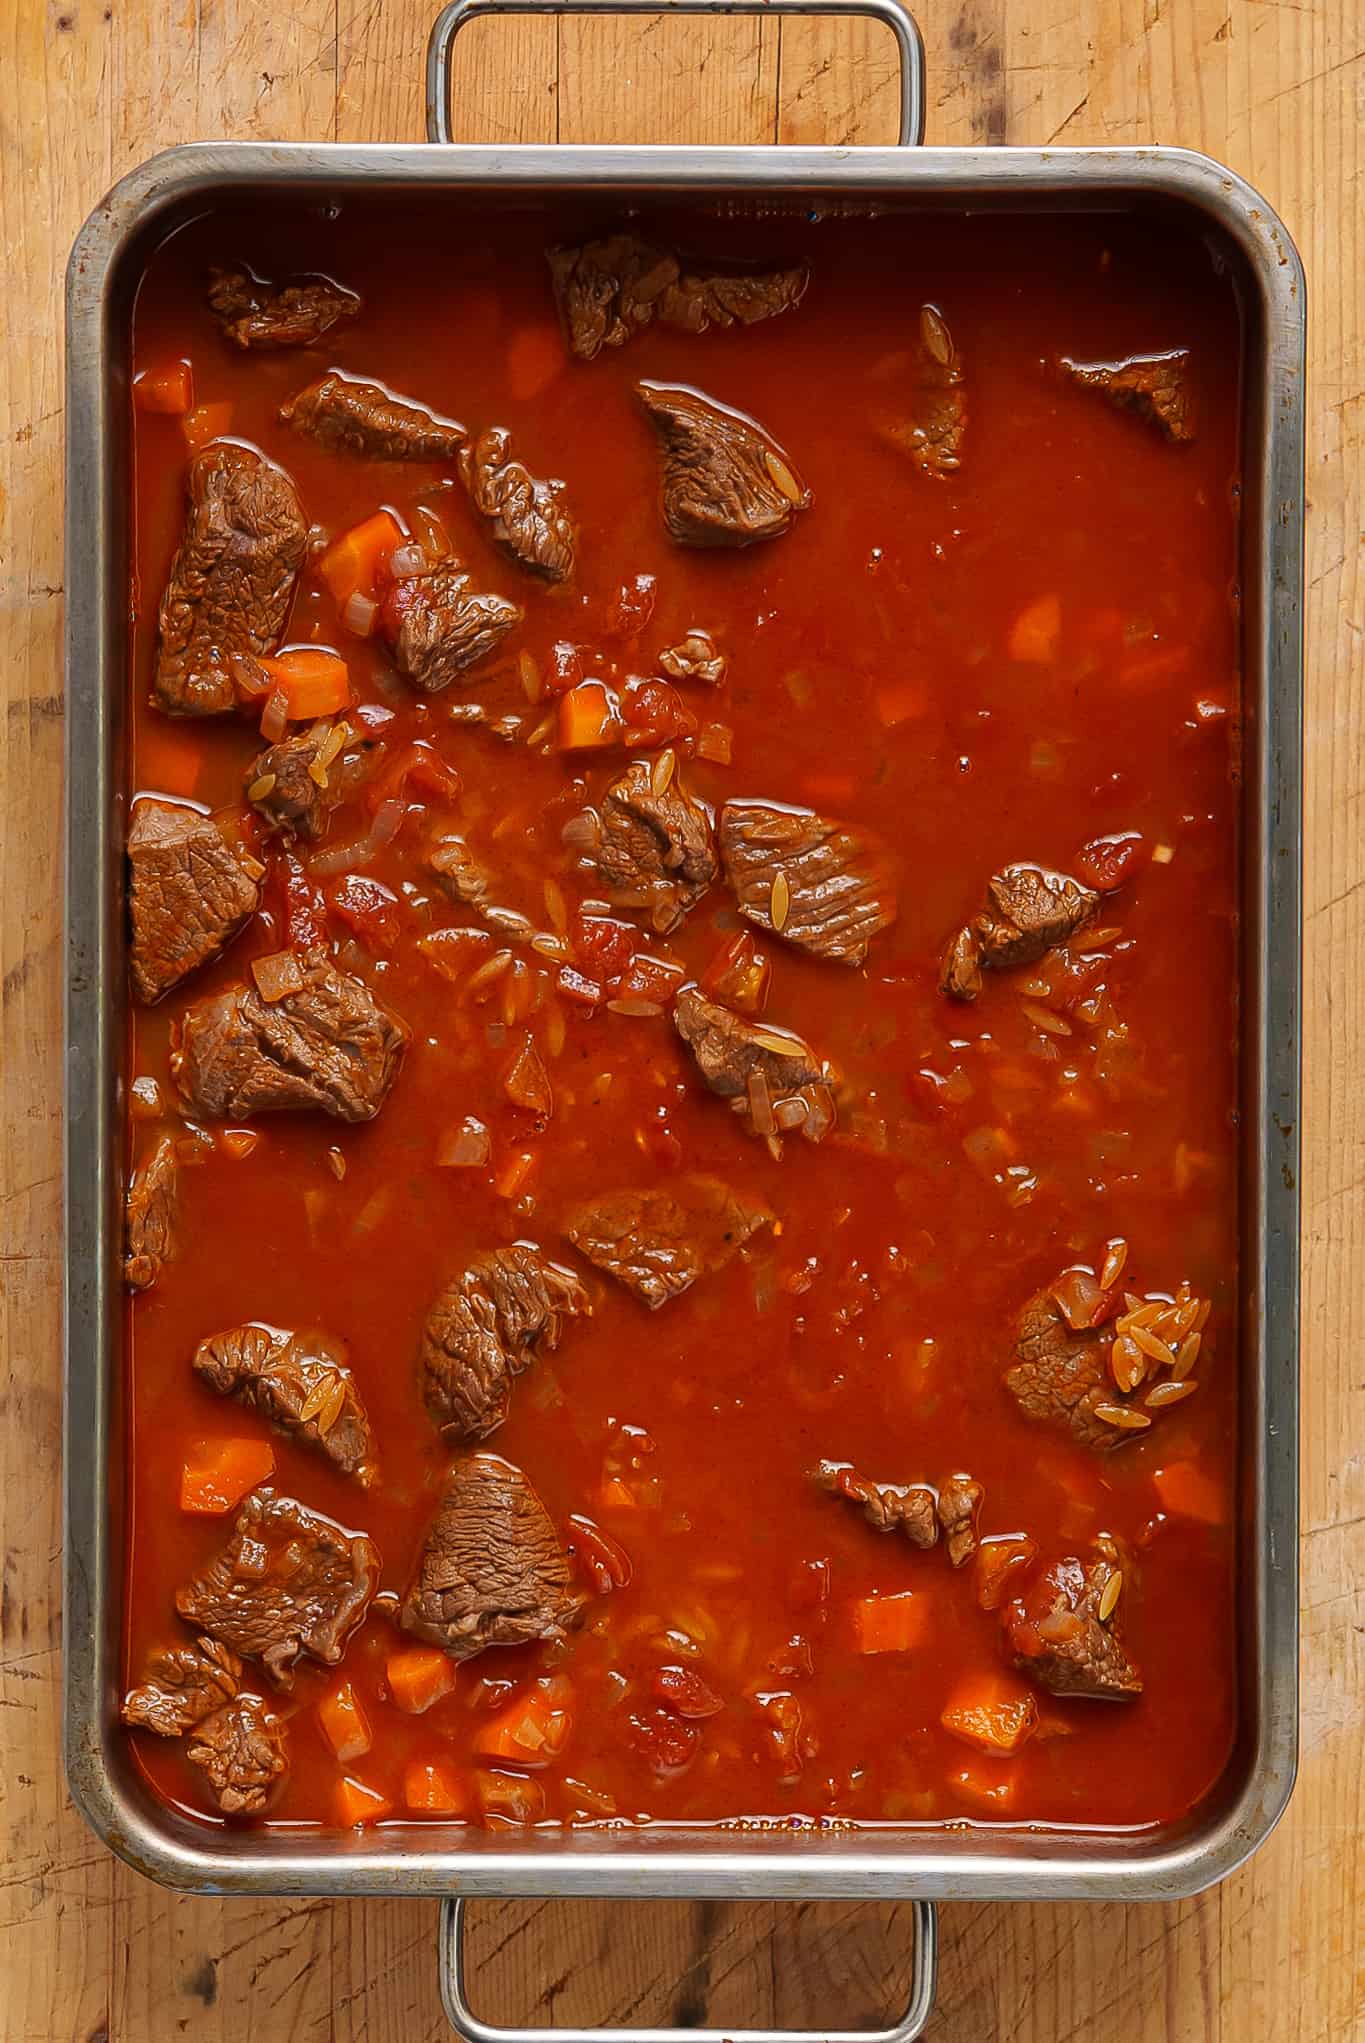 Youvetsi preparation (Greek Beef stew with Orzo pasta)